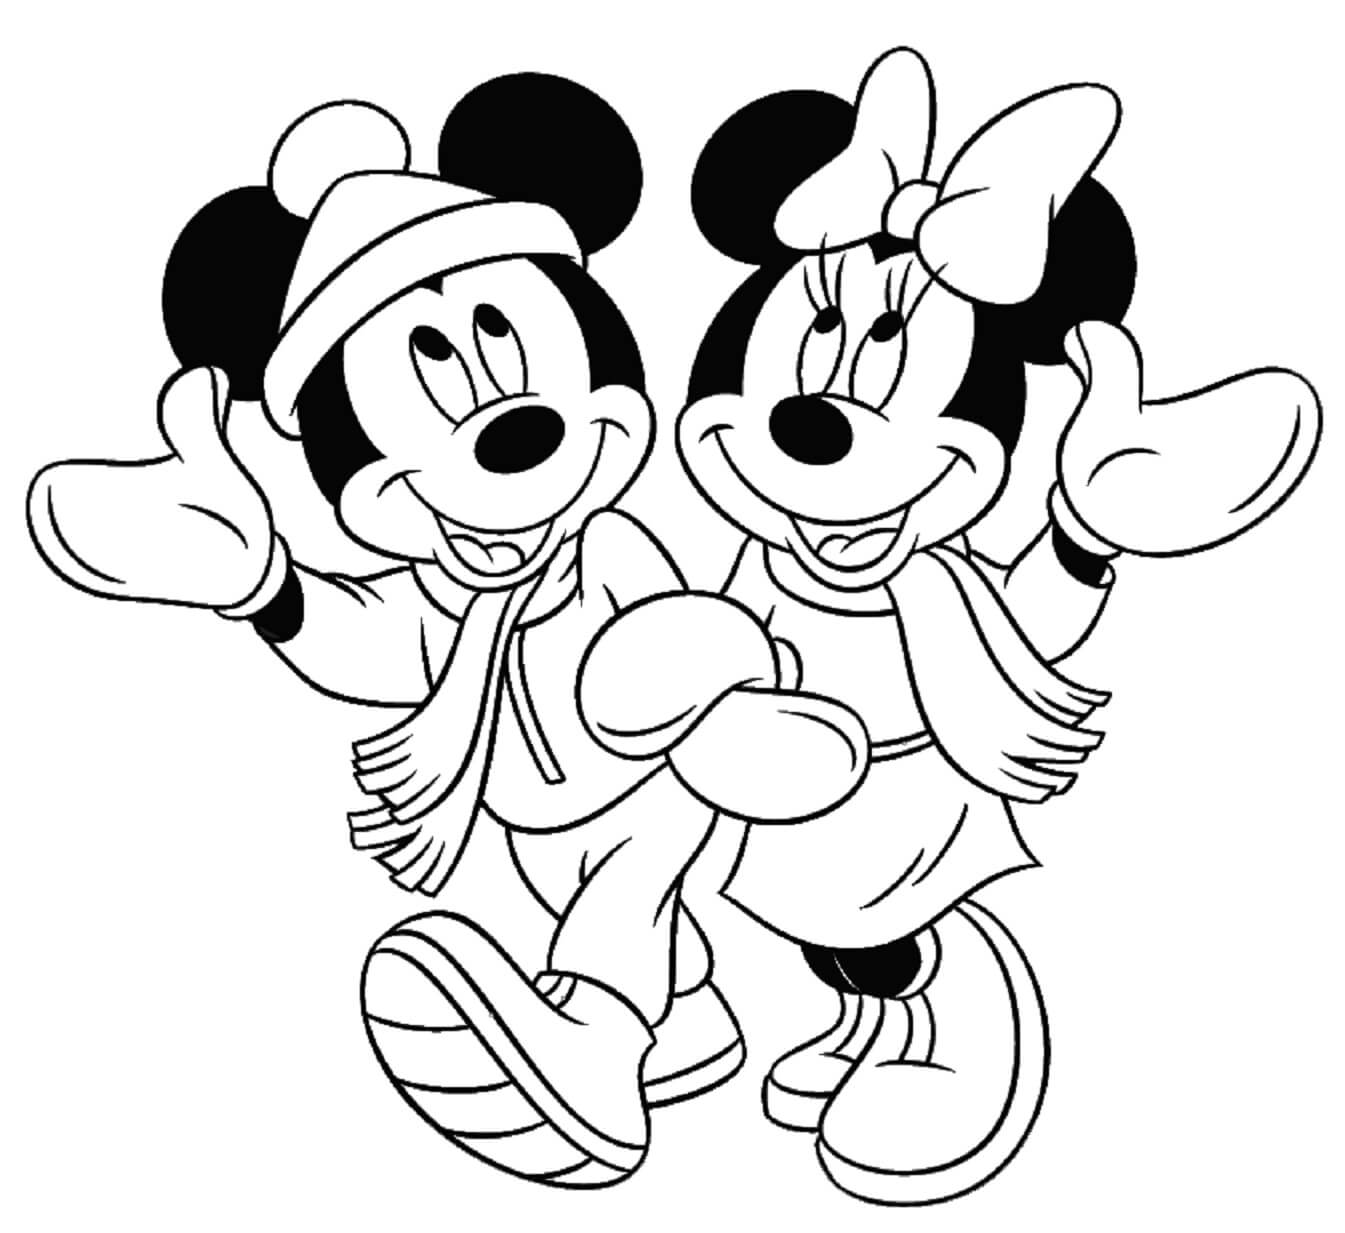 Mickey avec Minnie Mouse coloring page